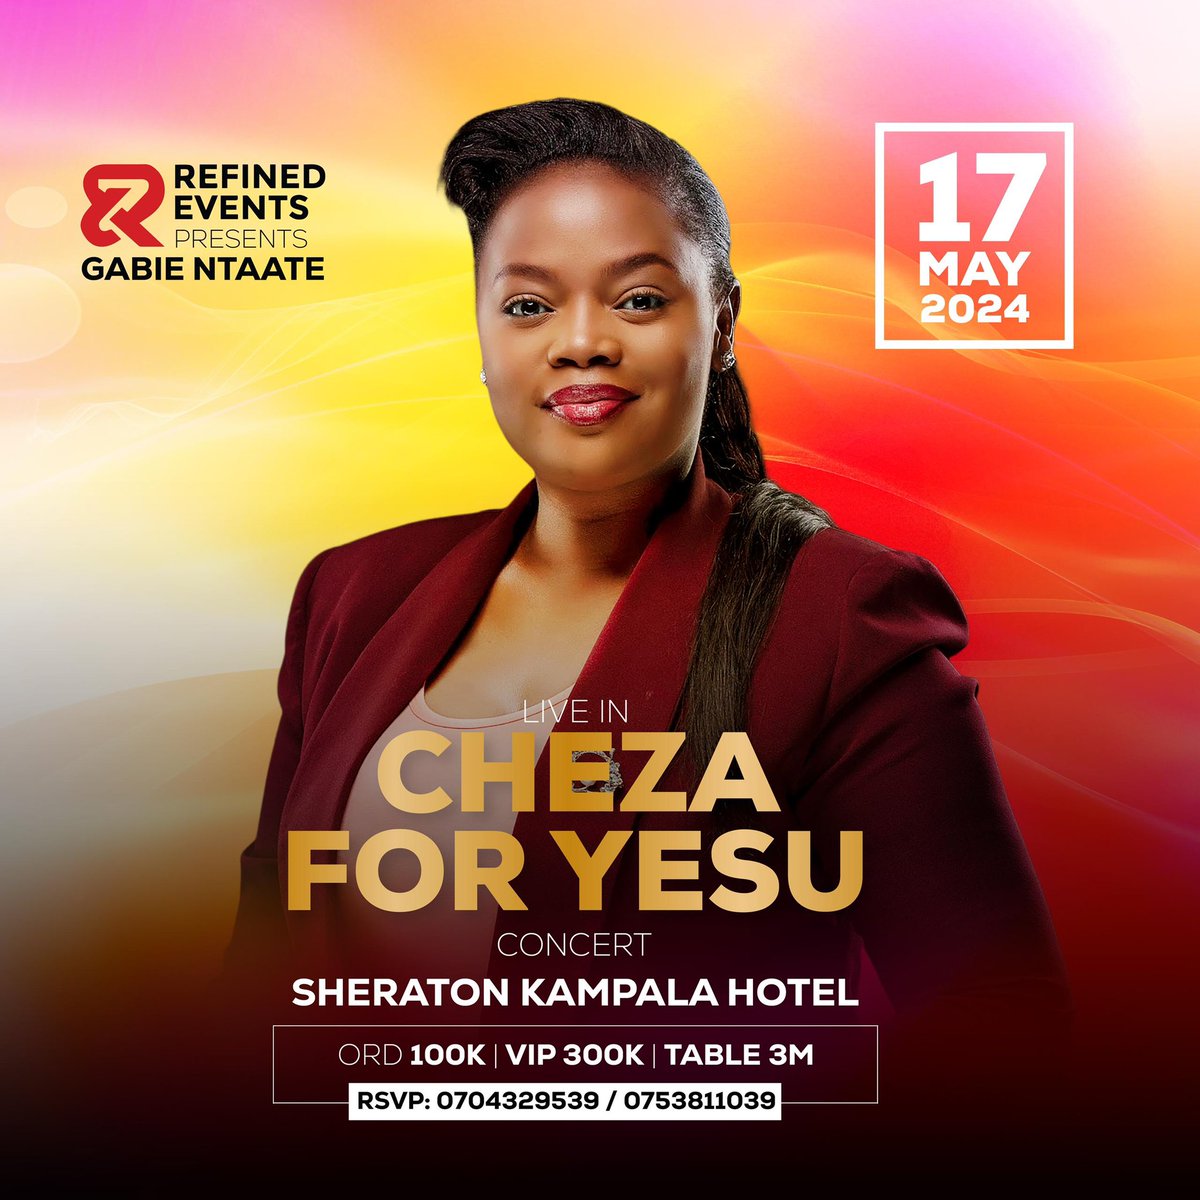 An evening of great music and heartfelt worship with @Gabientaate 

#ChezaForYesu Concert | May 17th | Sheraton Kampala Hotel